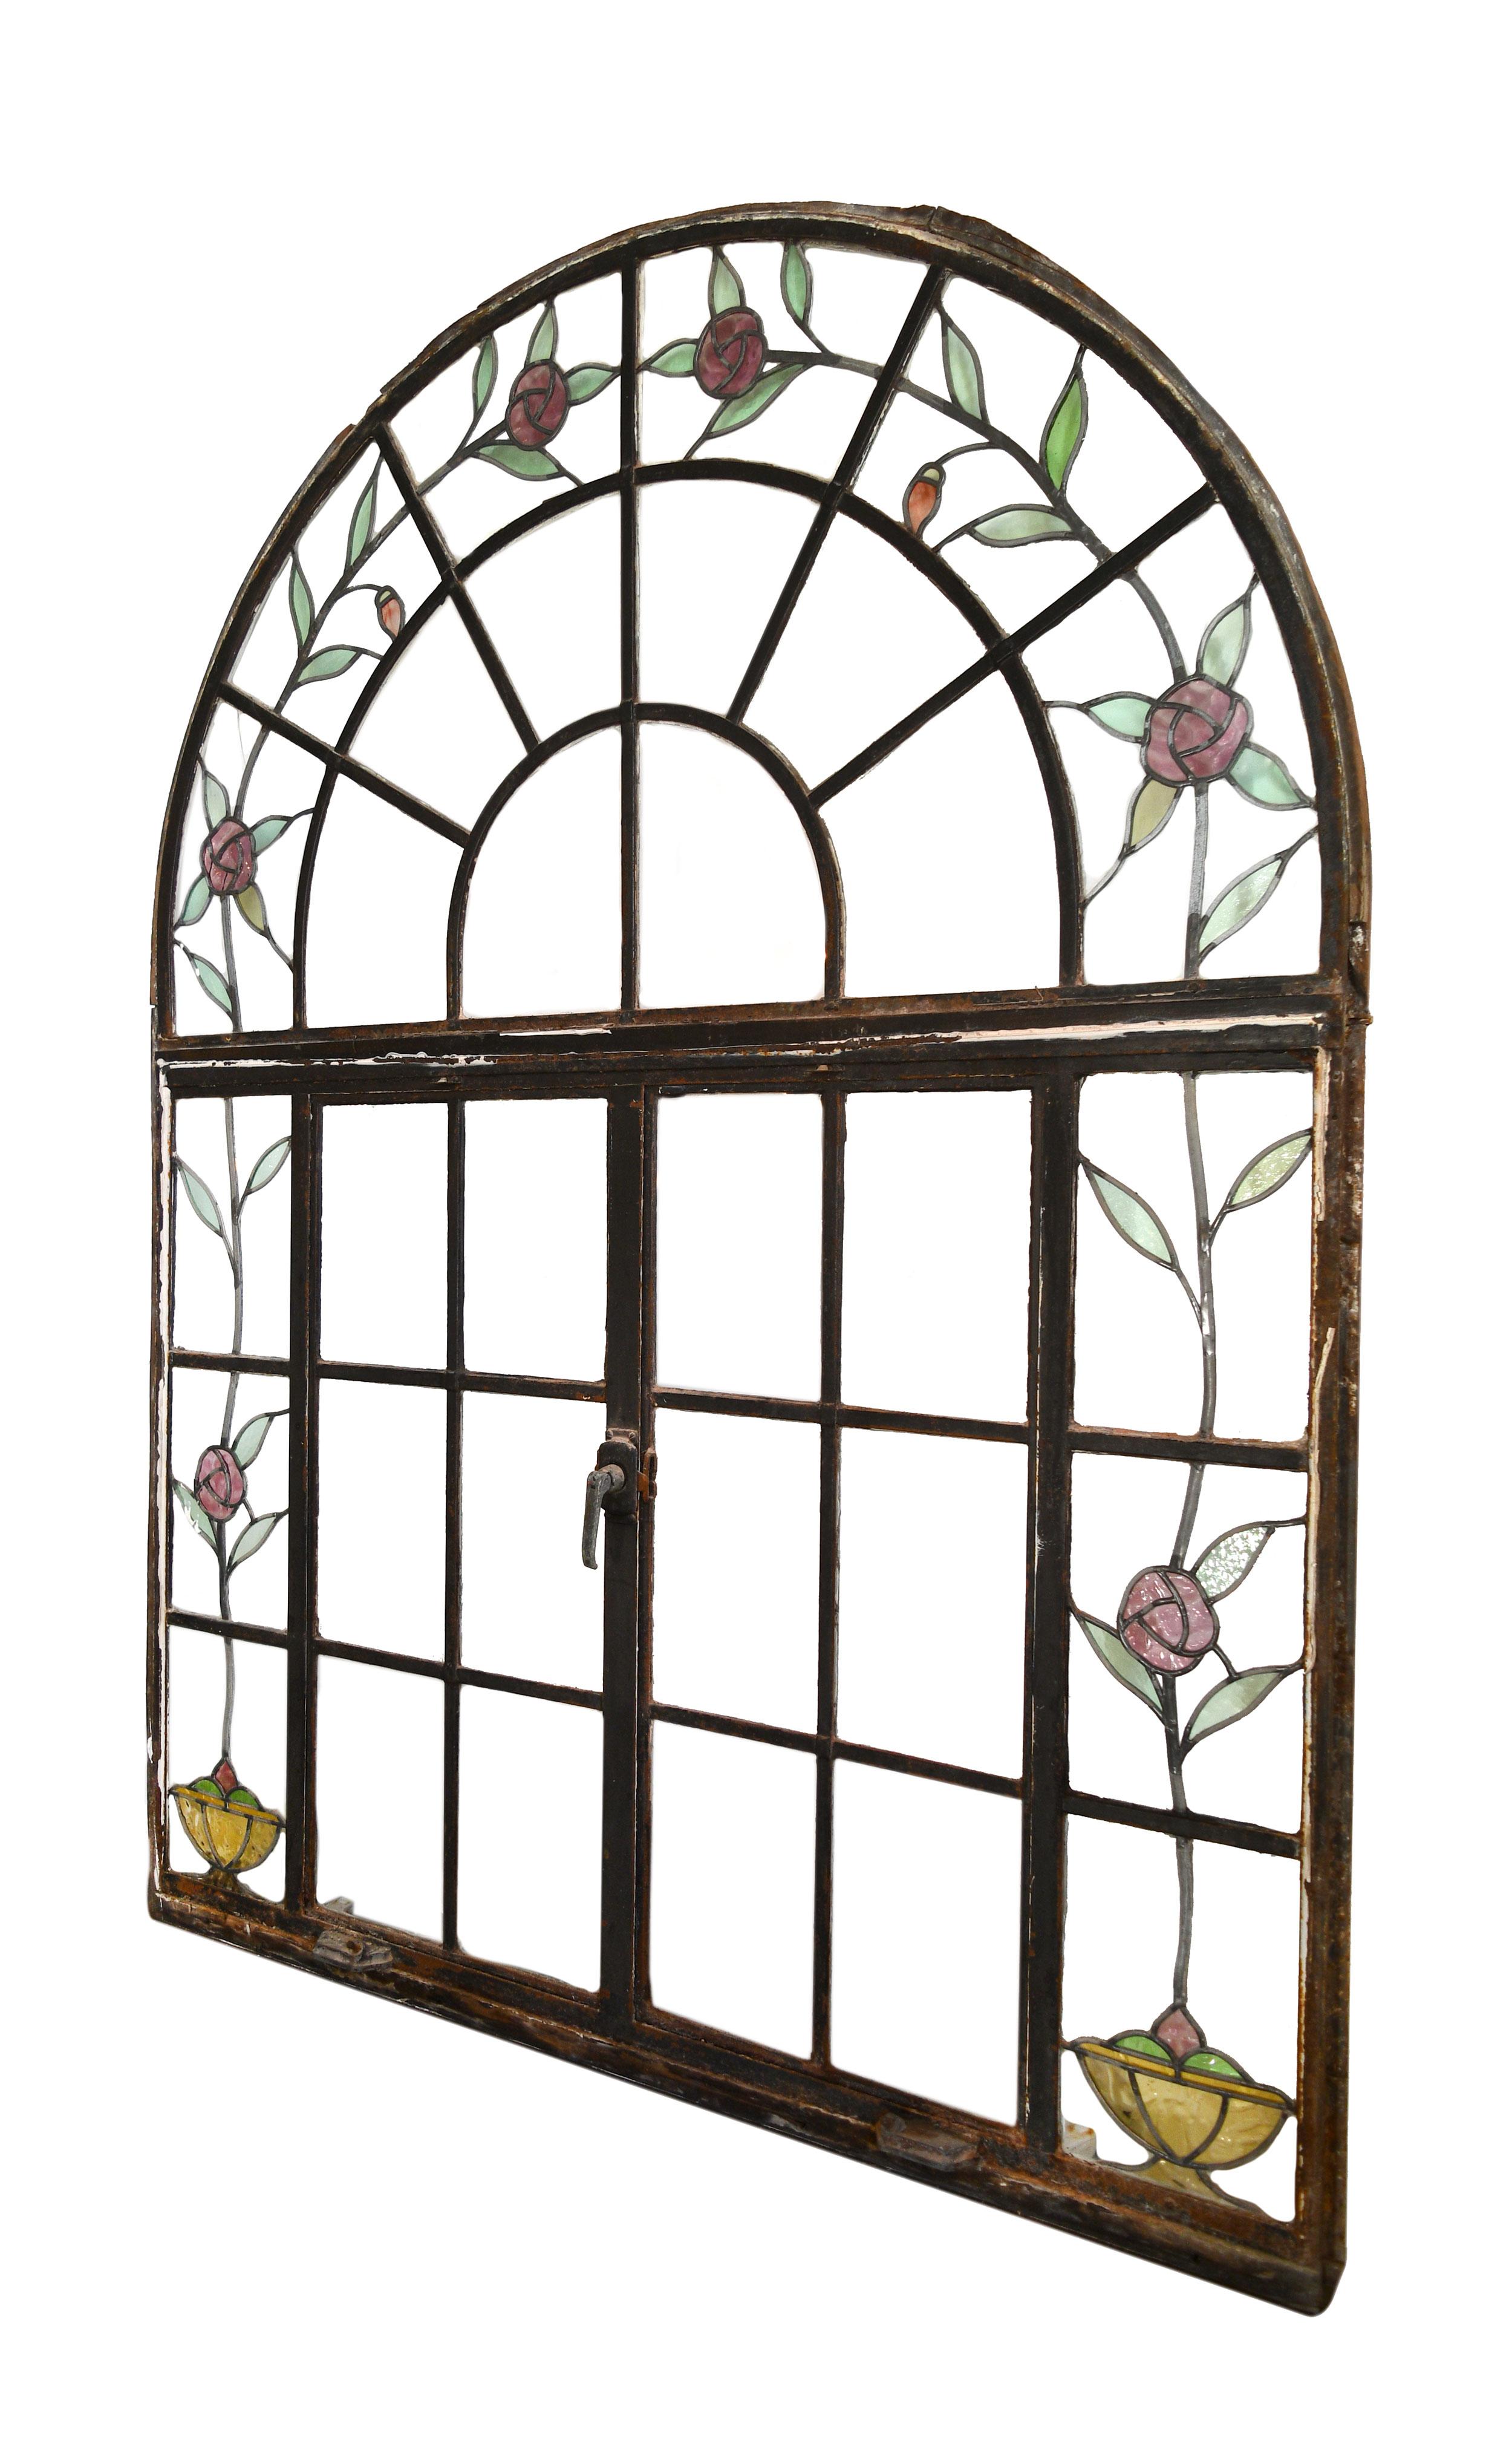 This stunning casement window features lovely stained glass roses throughout the uniquely arched frame. This window is in great condition with only one small crack within the glass.
  